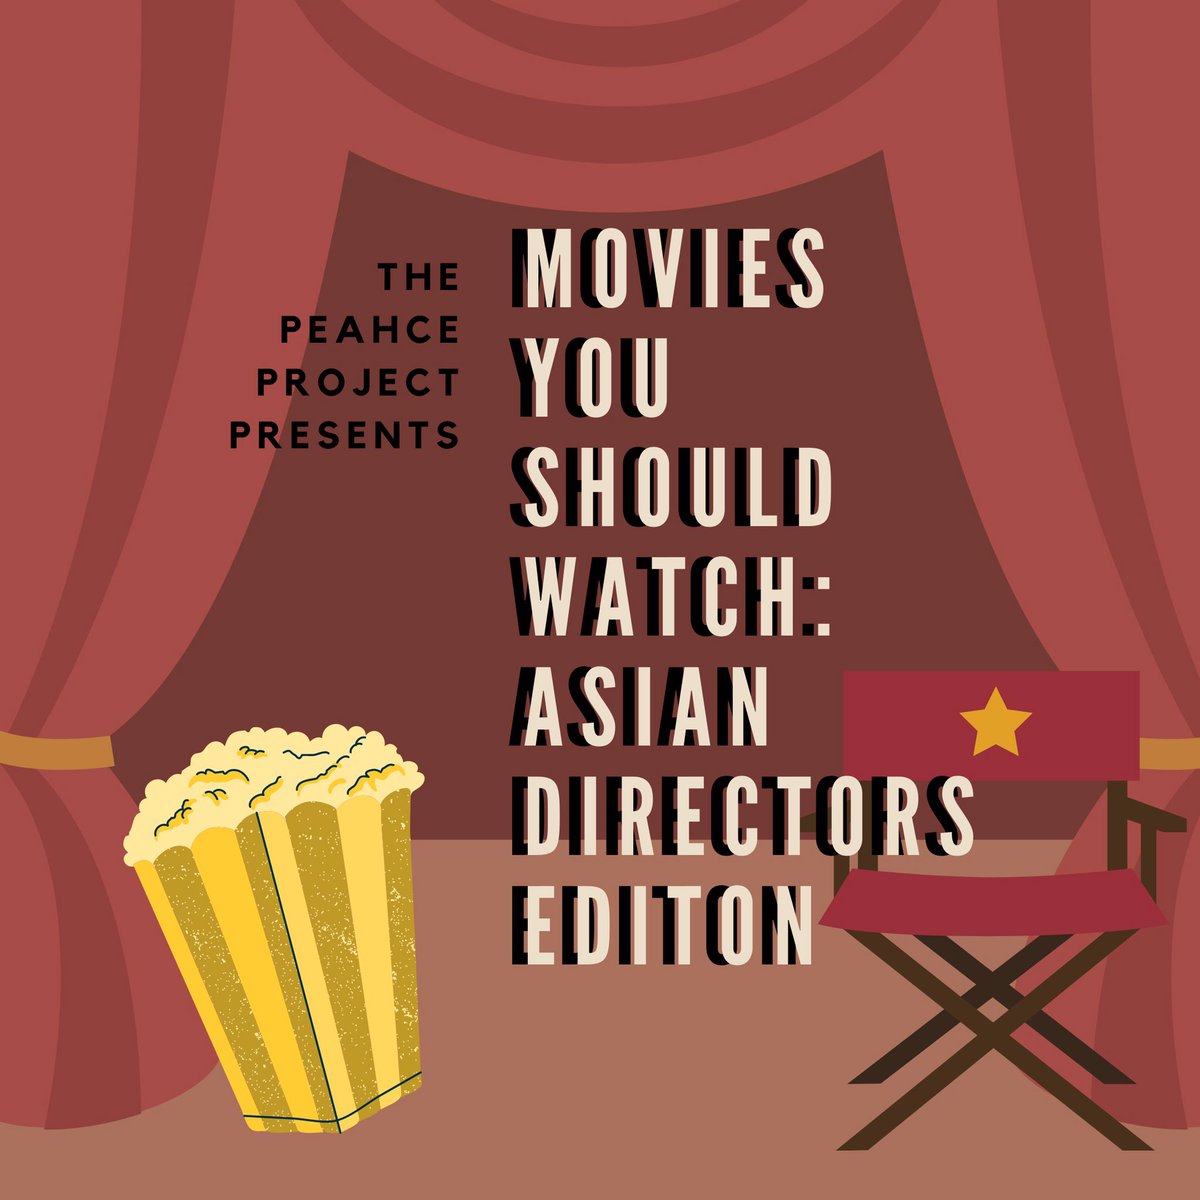 Starting off the week right with movie recommendations—Asian directors edition! Scroll to find 8 amazing movies and honorable mentions that you could watch during your free time!  (1/3) graphic by tiffany #movies  #MovieMonday  #film  #films  #asians  #RepresentationMatters